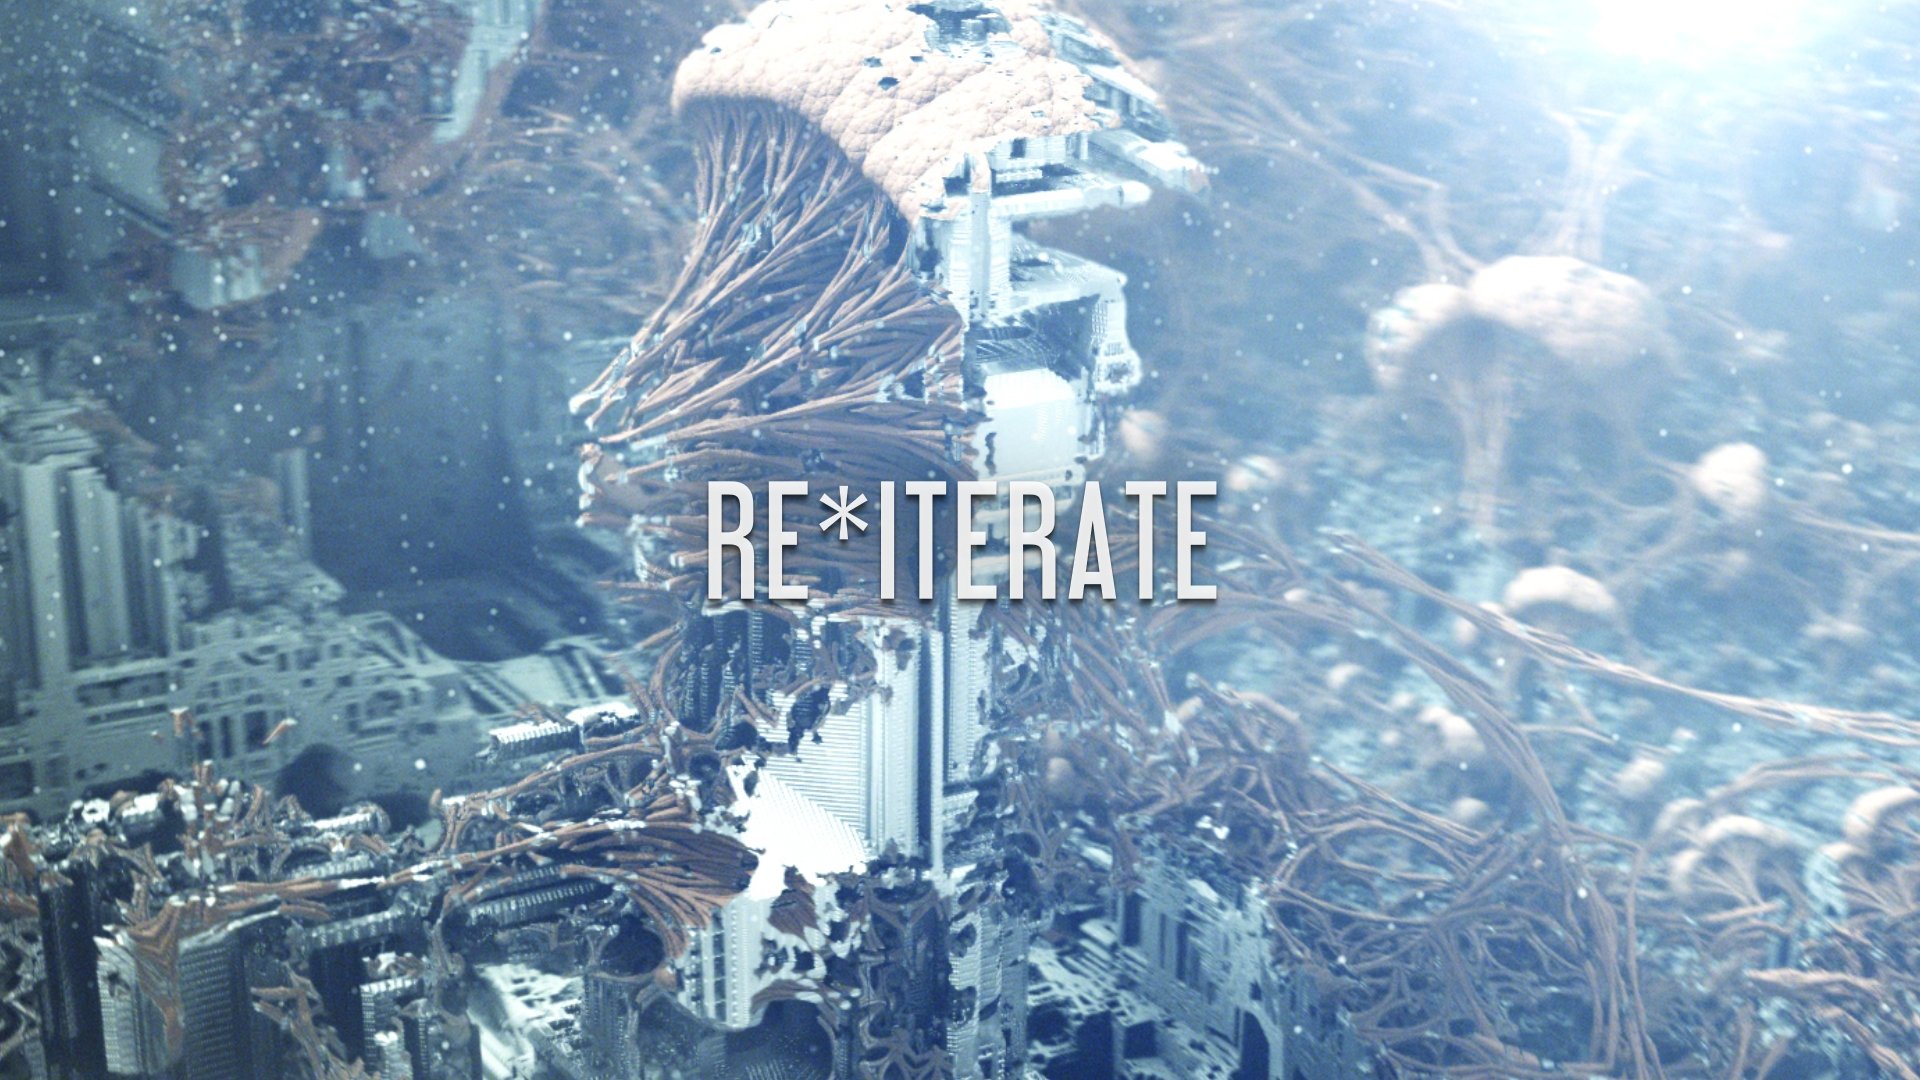 RE*Iterate